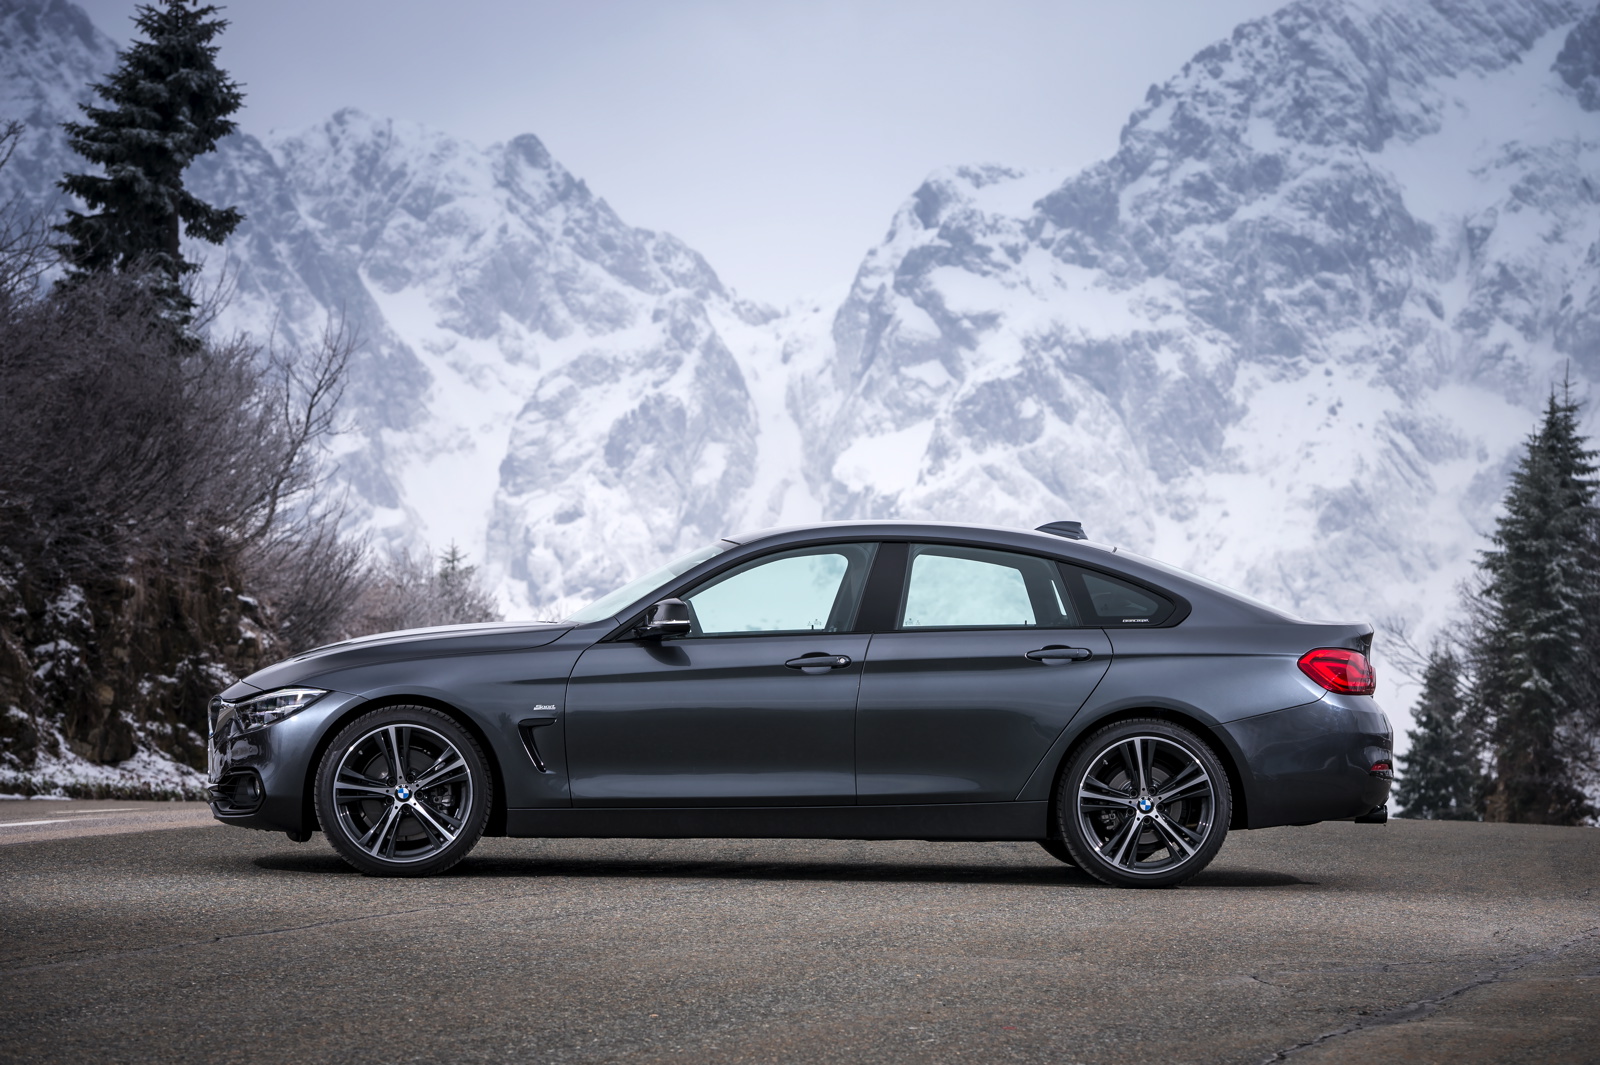 Top Gear says BMW 4 Series Gran Coupe is possibly BMW's Best Car